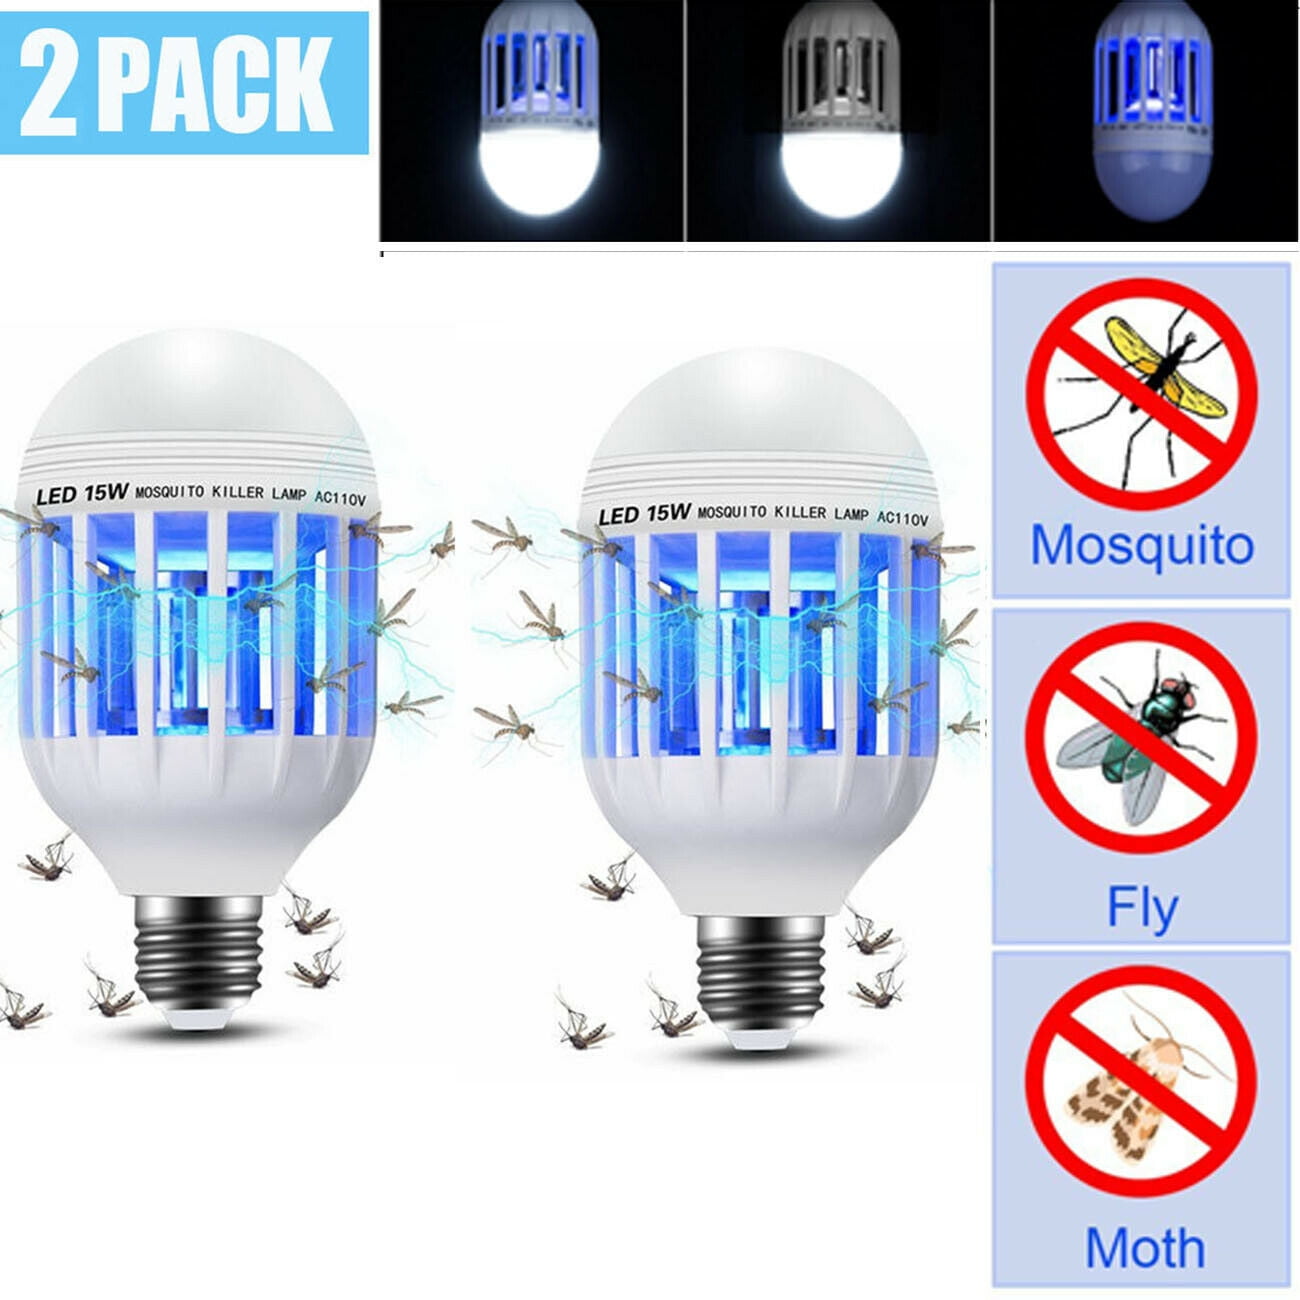 Kills Insects & Mosquitoes! Genuine ZappLight 2n1 LED Light Bulb & Bug Zapper 